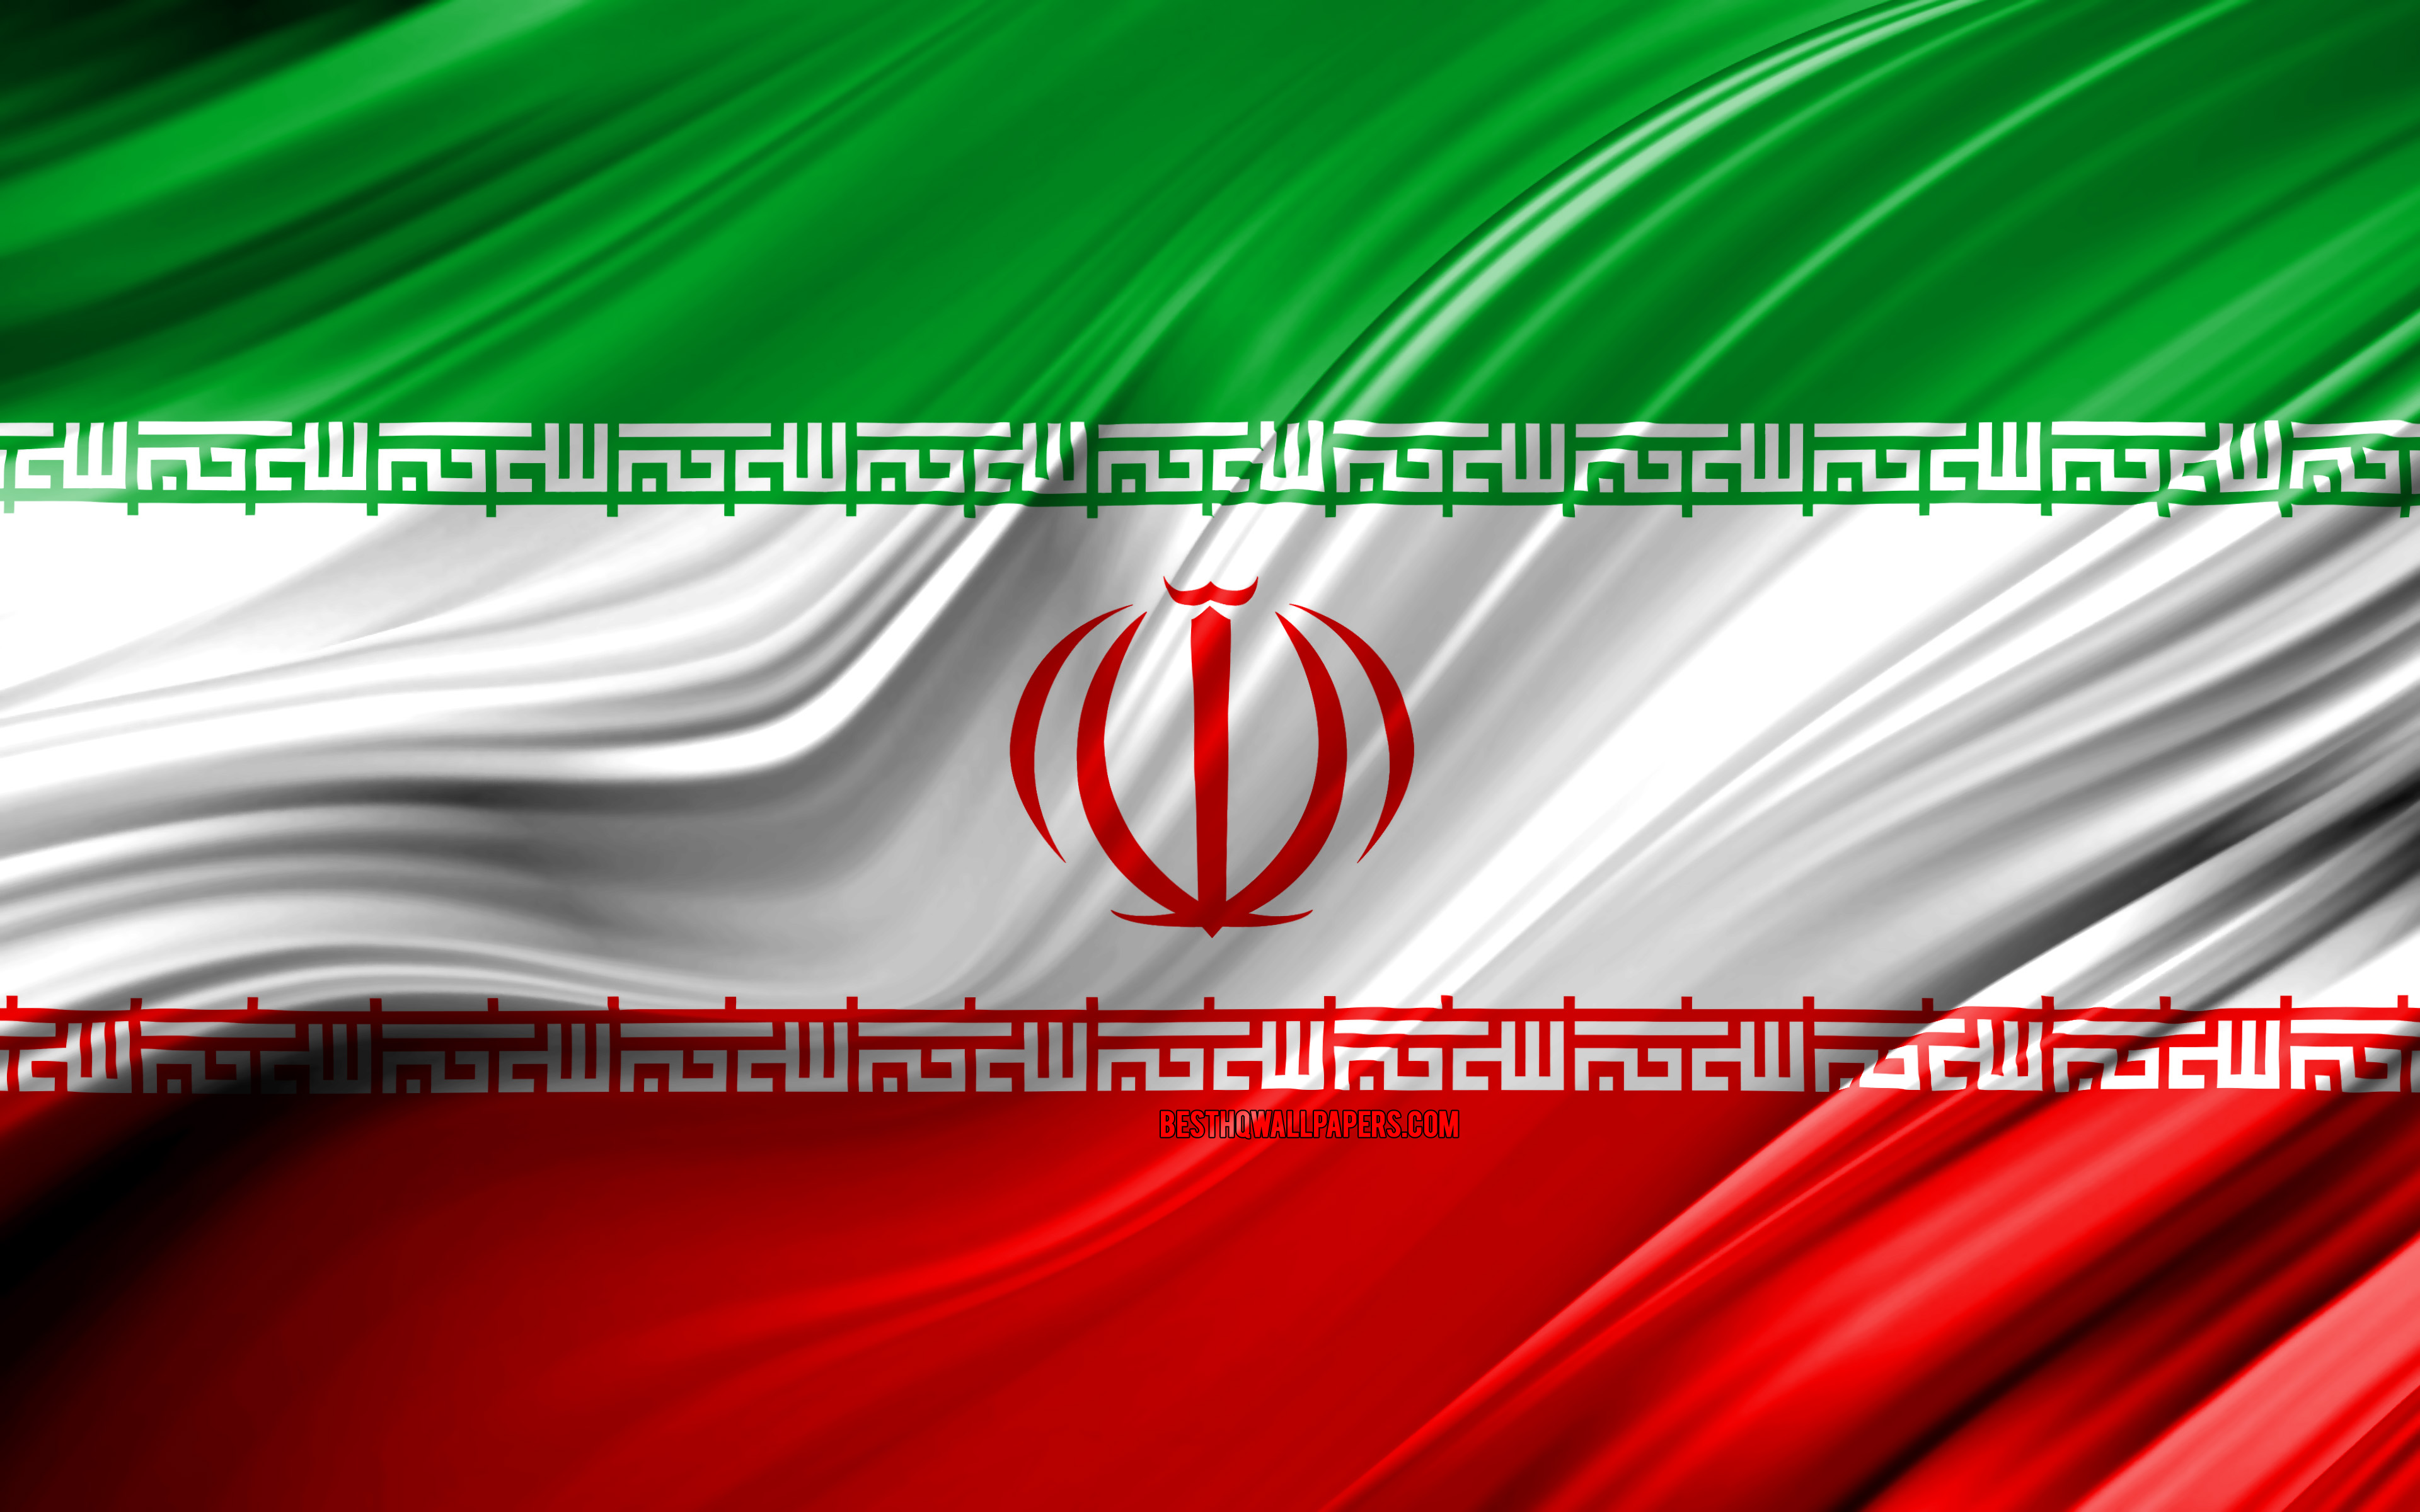 Download wallpaper 4k, Iranian flag, Asian countries, 3D waves, Flag of Iran, national symbols, Iran 3D flag, art, Asia, Iran for desktop with resolution 3840x2400. High Quality HD picture wallpaper